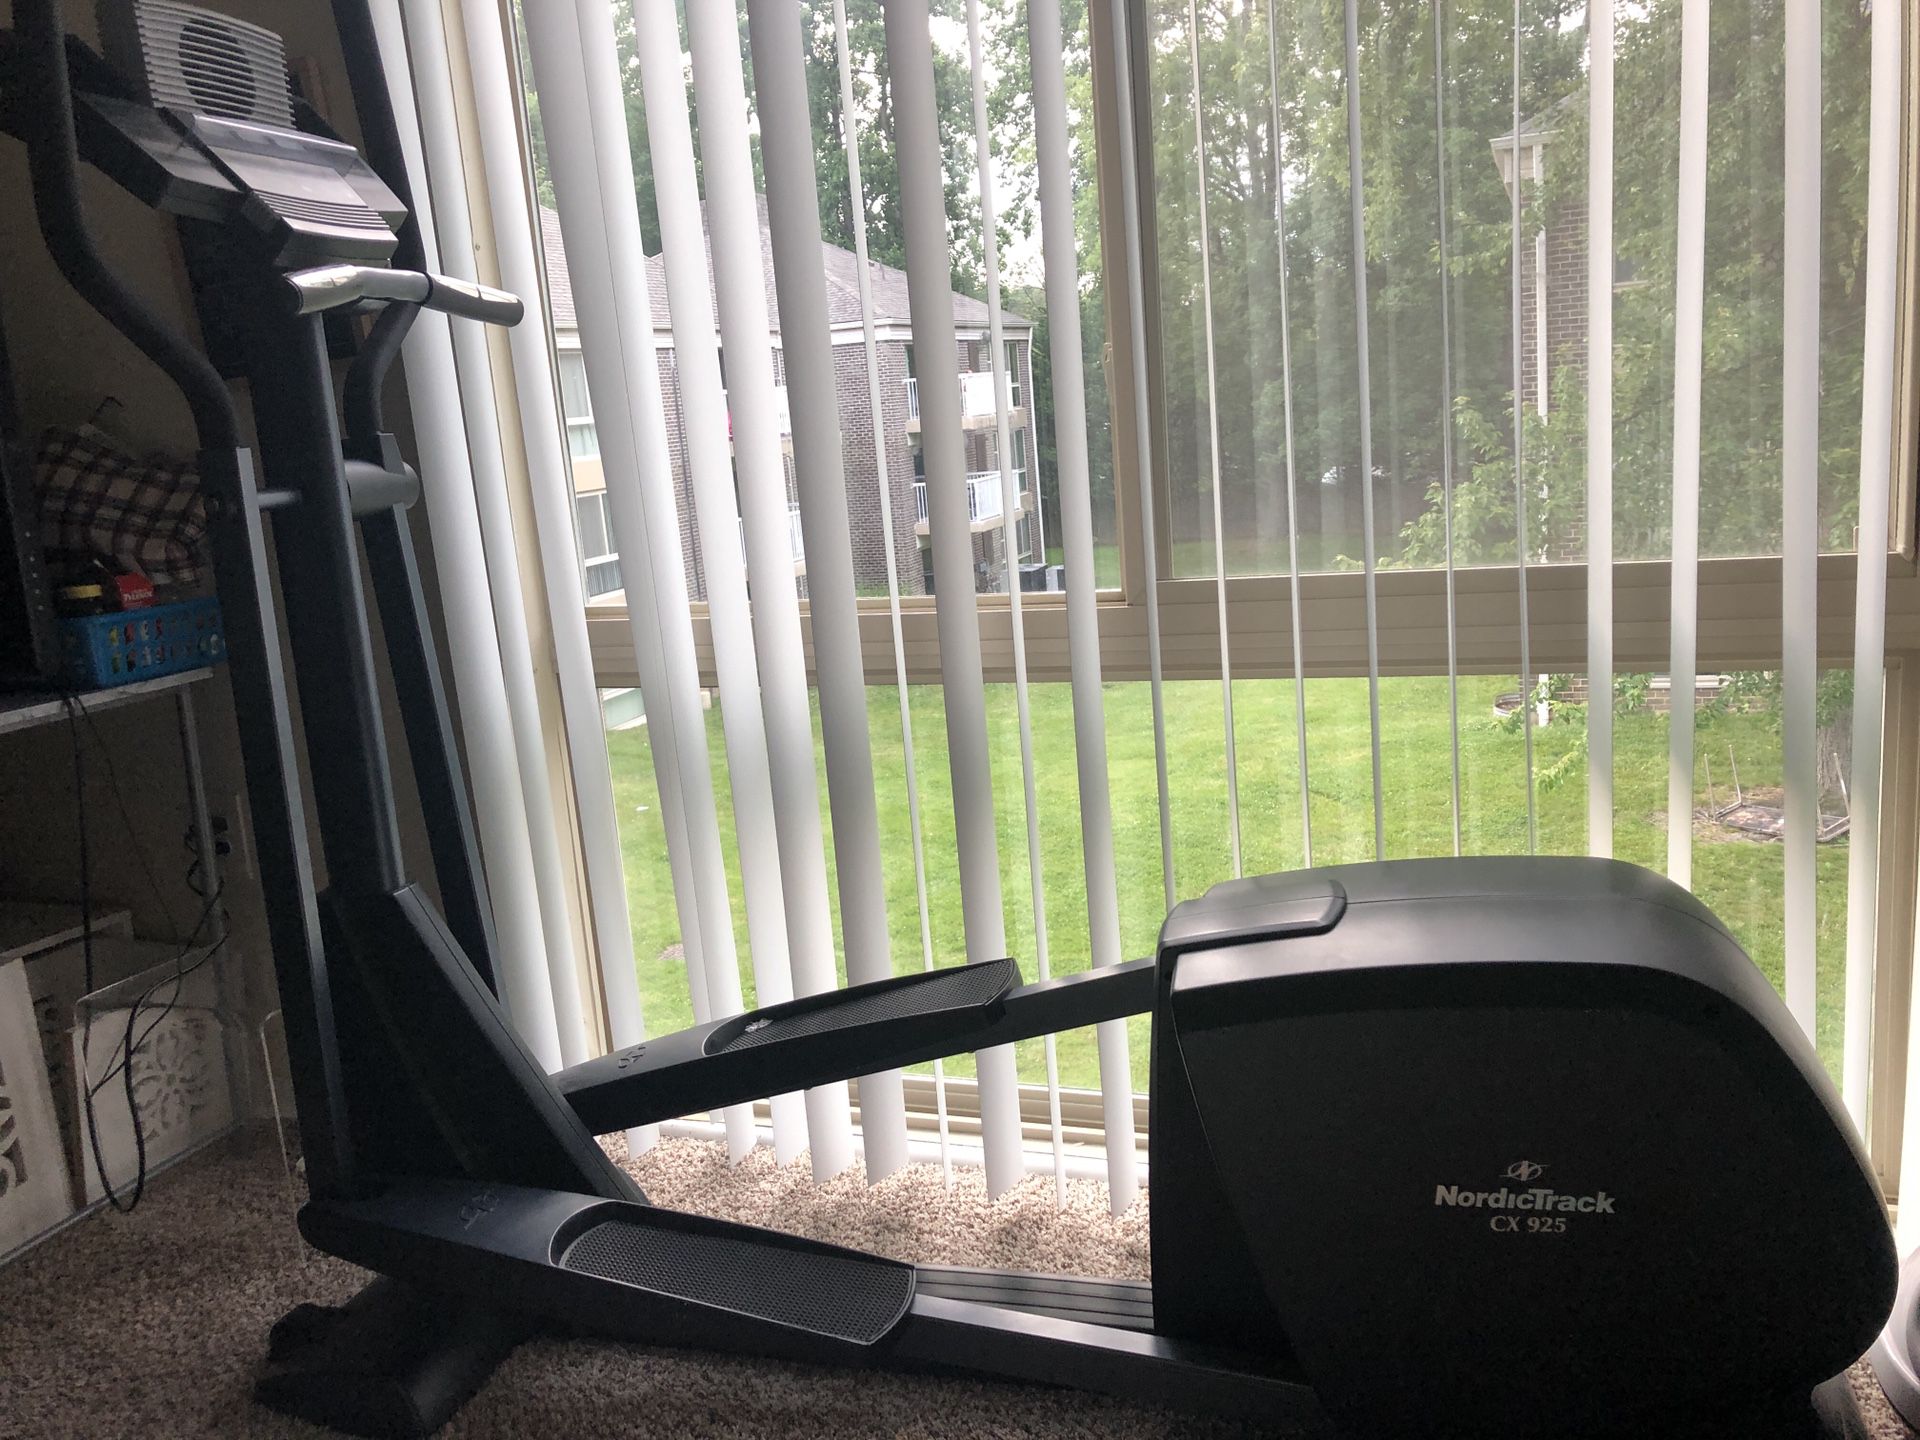 I exchange this elliptical for a treadmill, working perfectly !!!